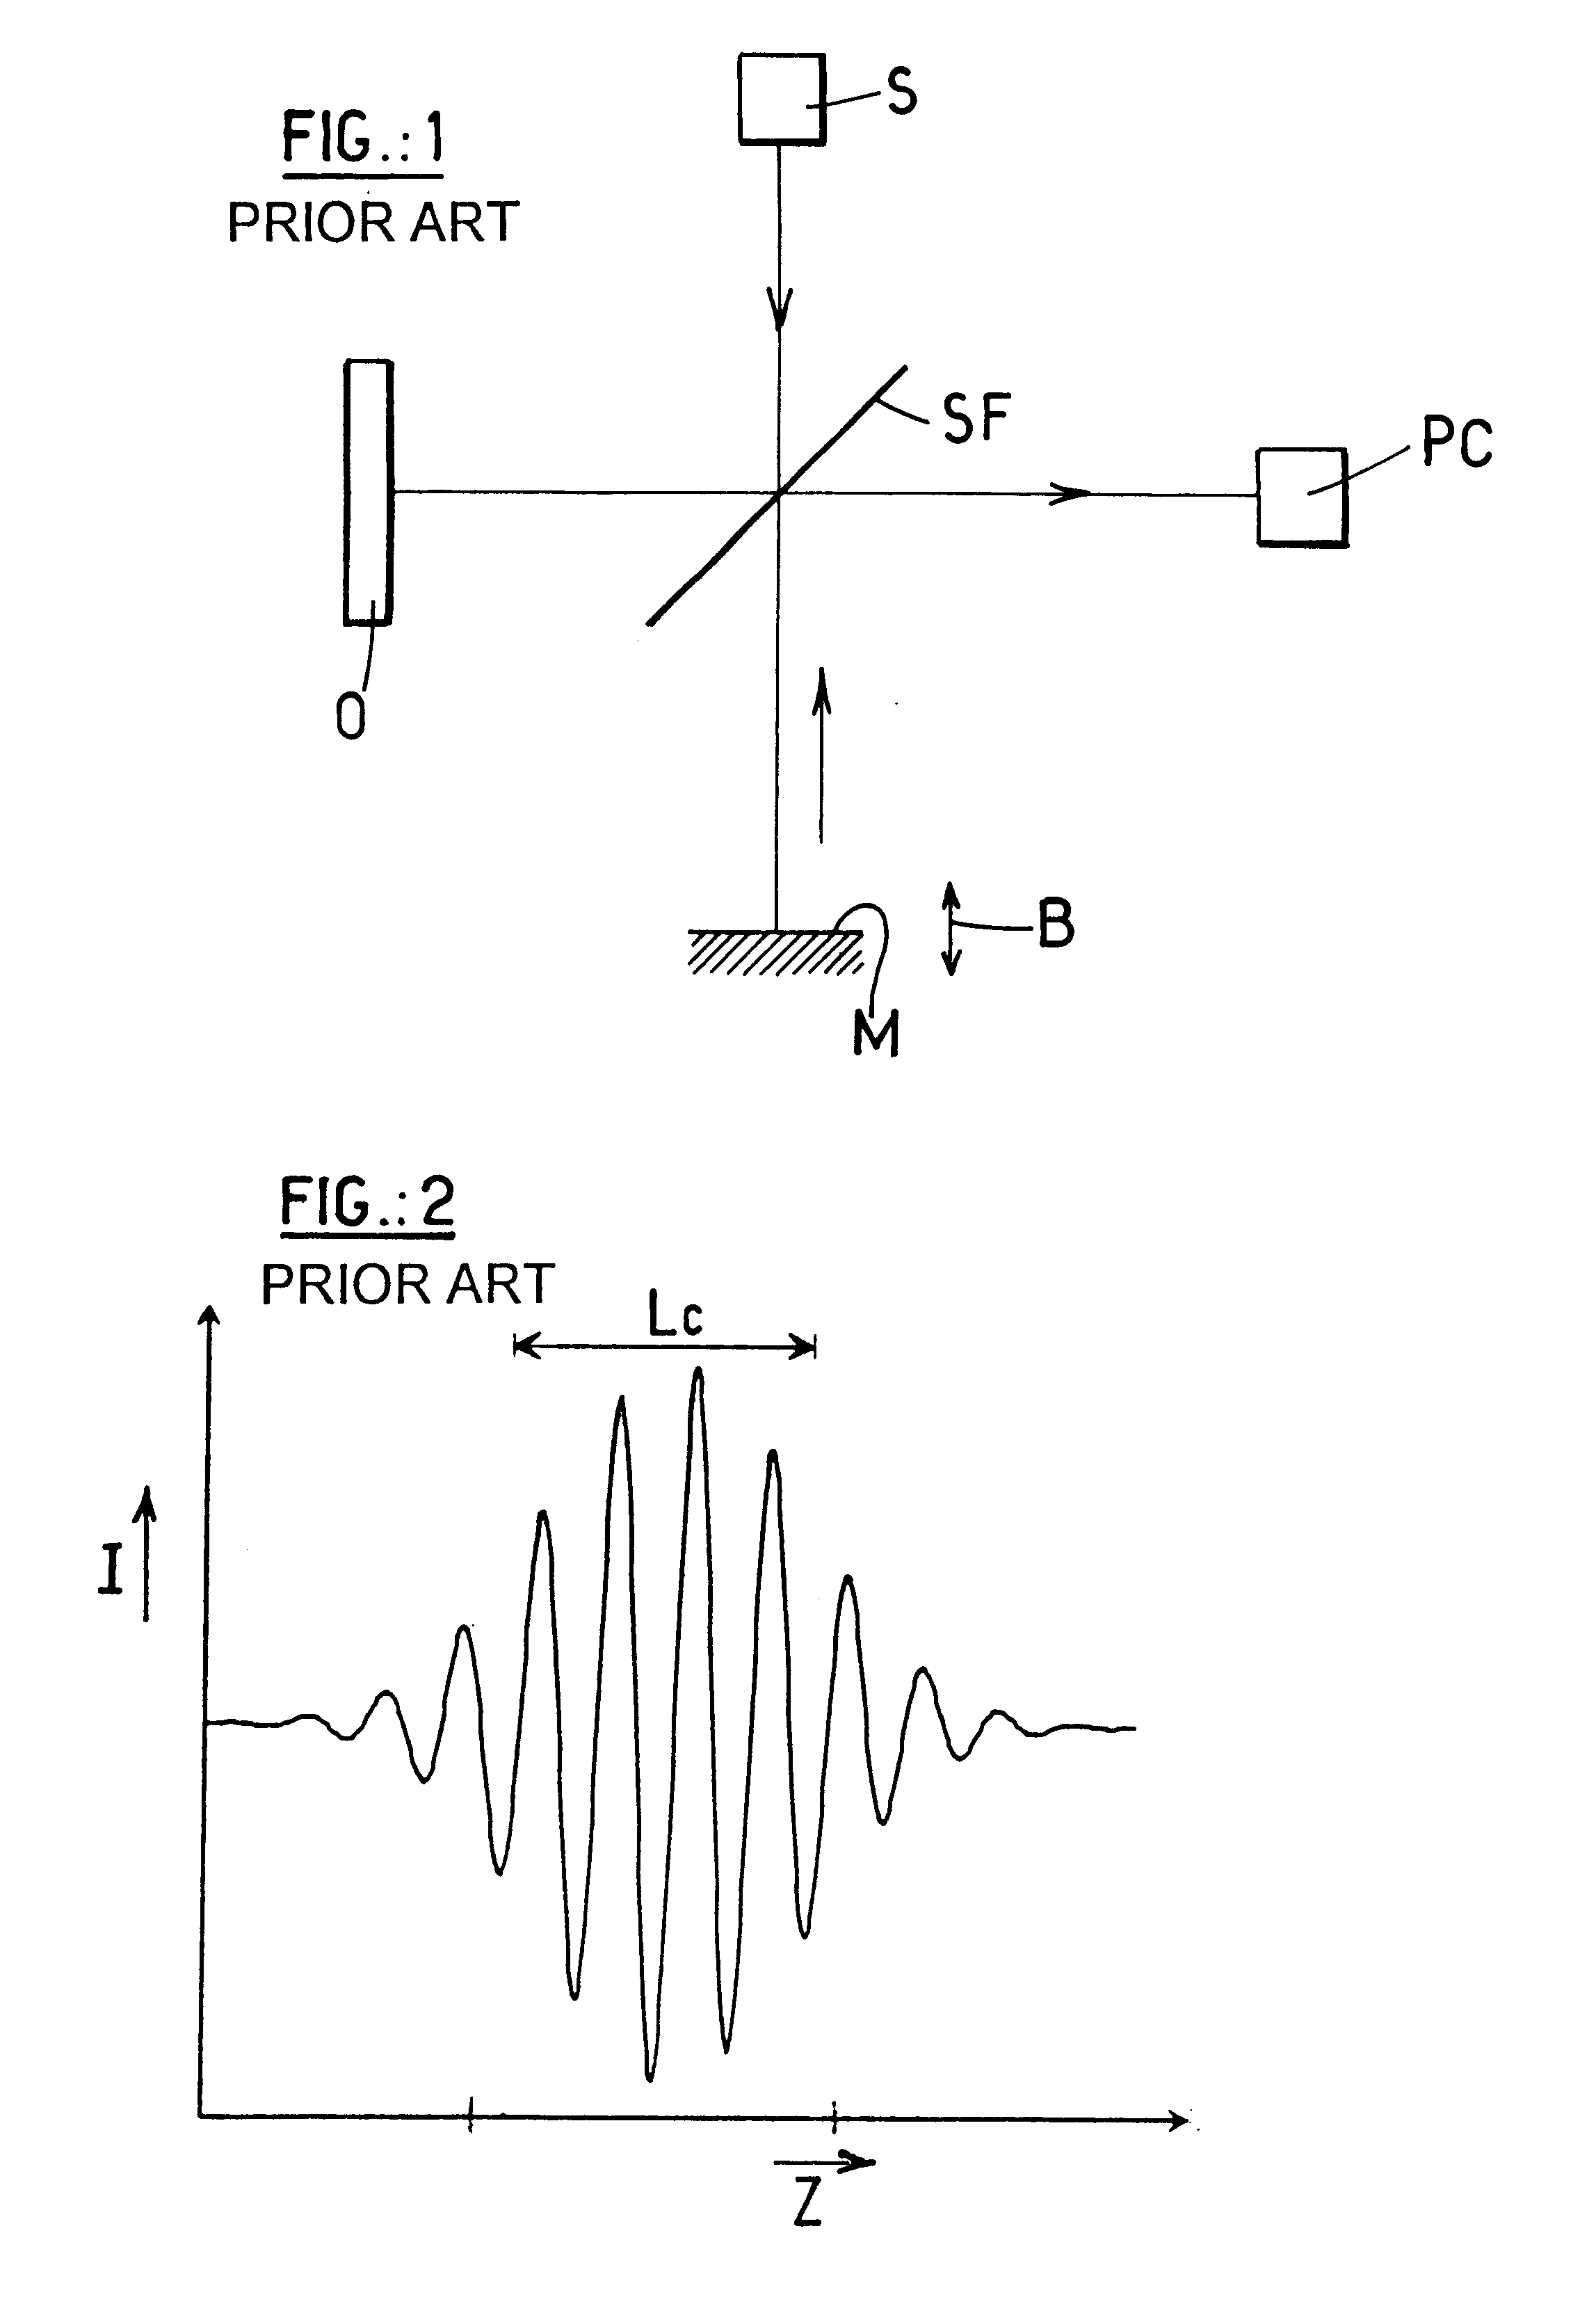 Interferometric device for recording the depth optical reflection and/or transmission characteristics of an object